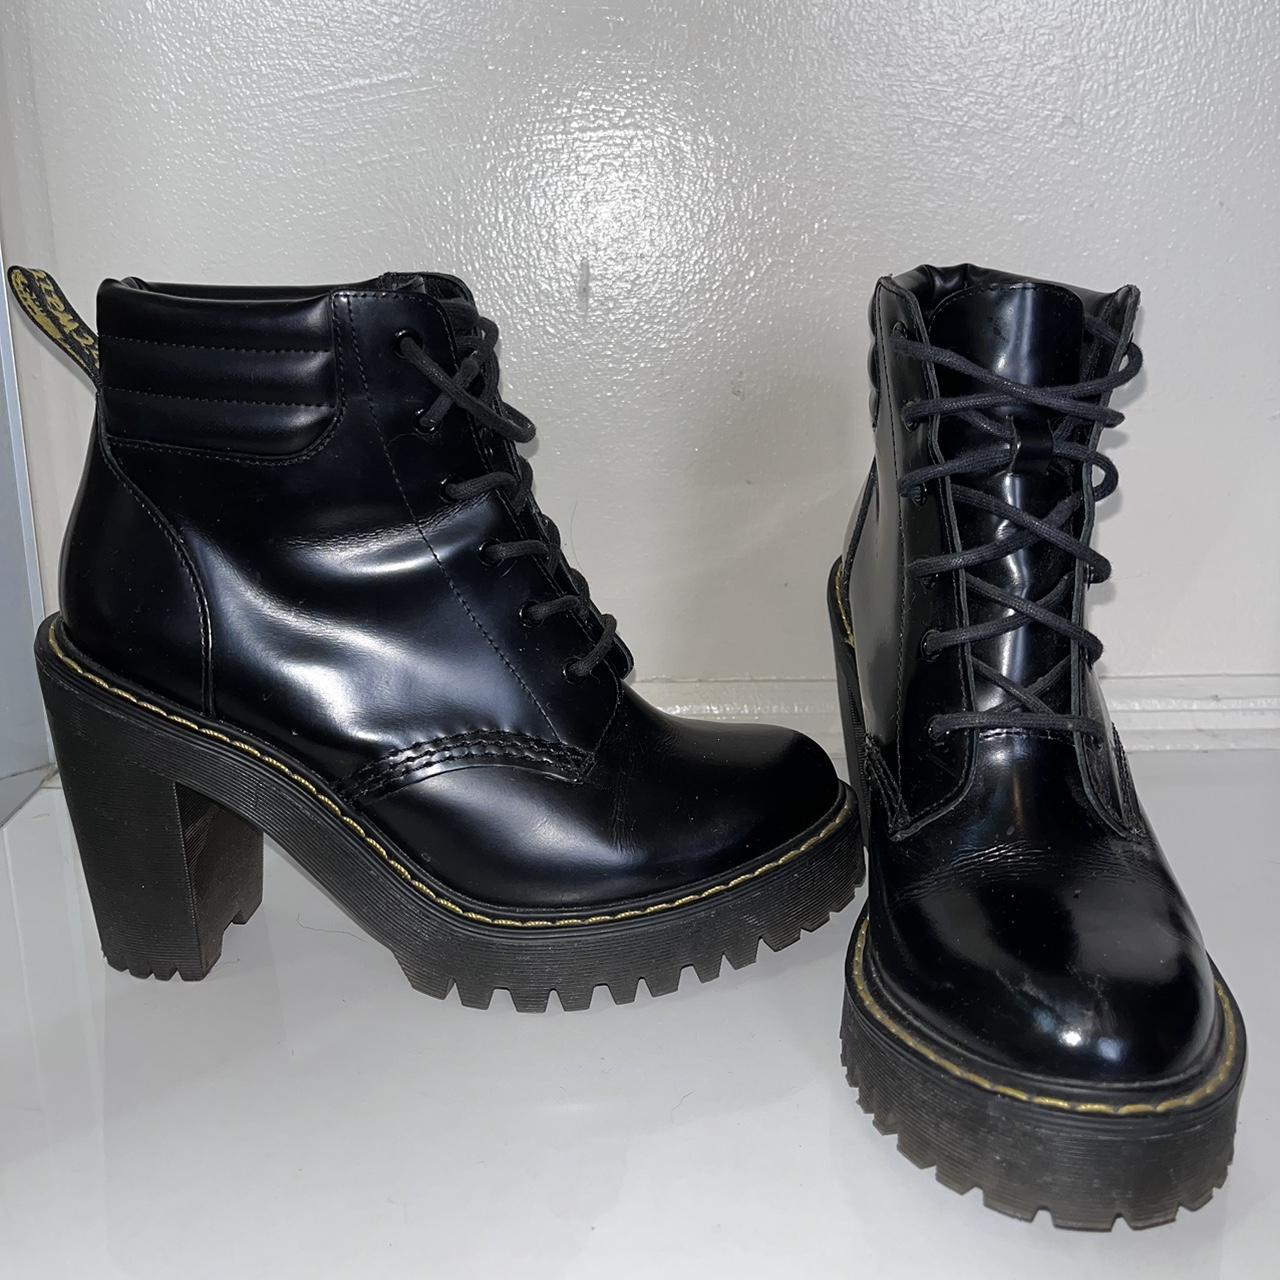 This is the Persephone by Dr. Martens, a 6-eye... - Depop